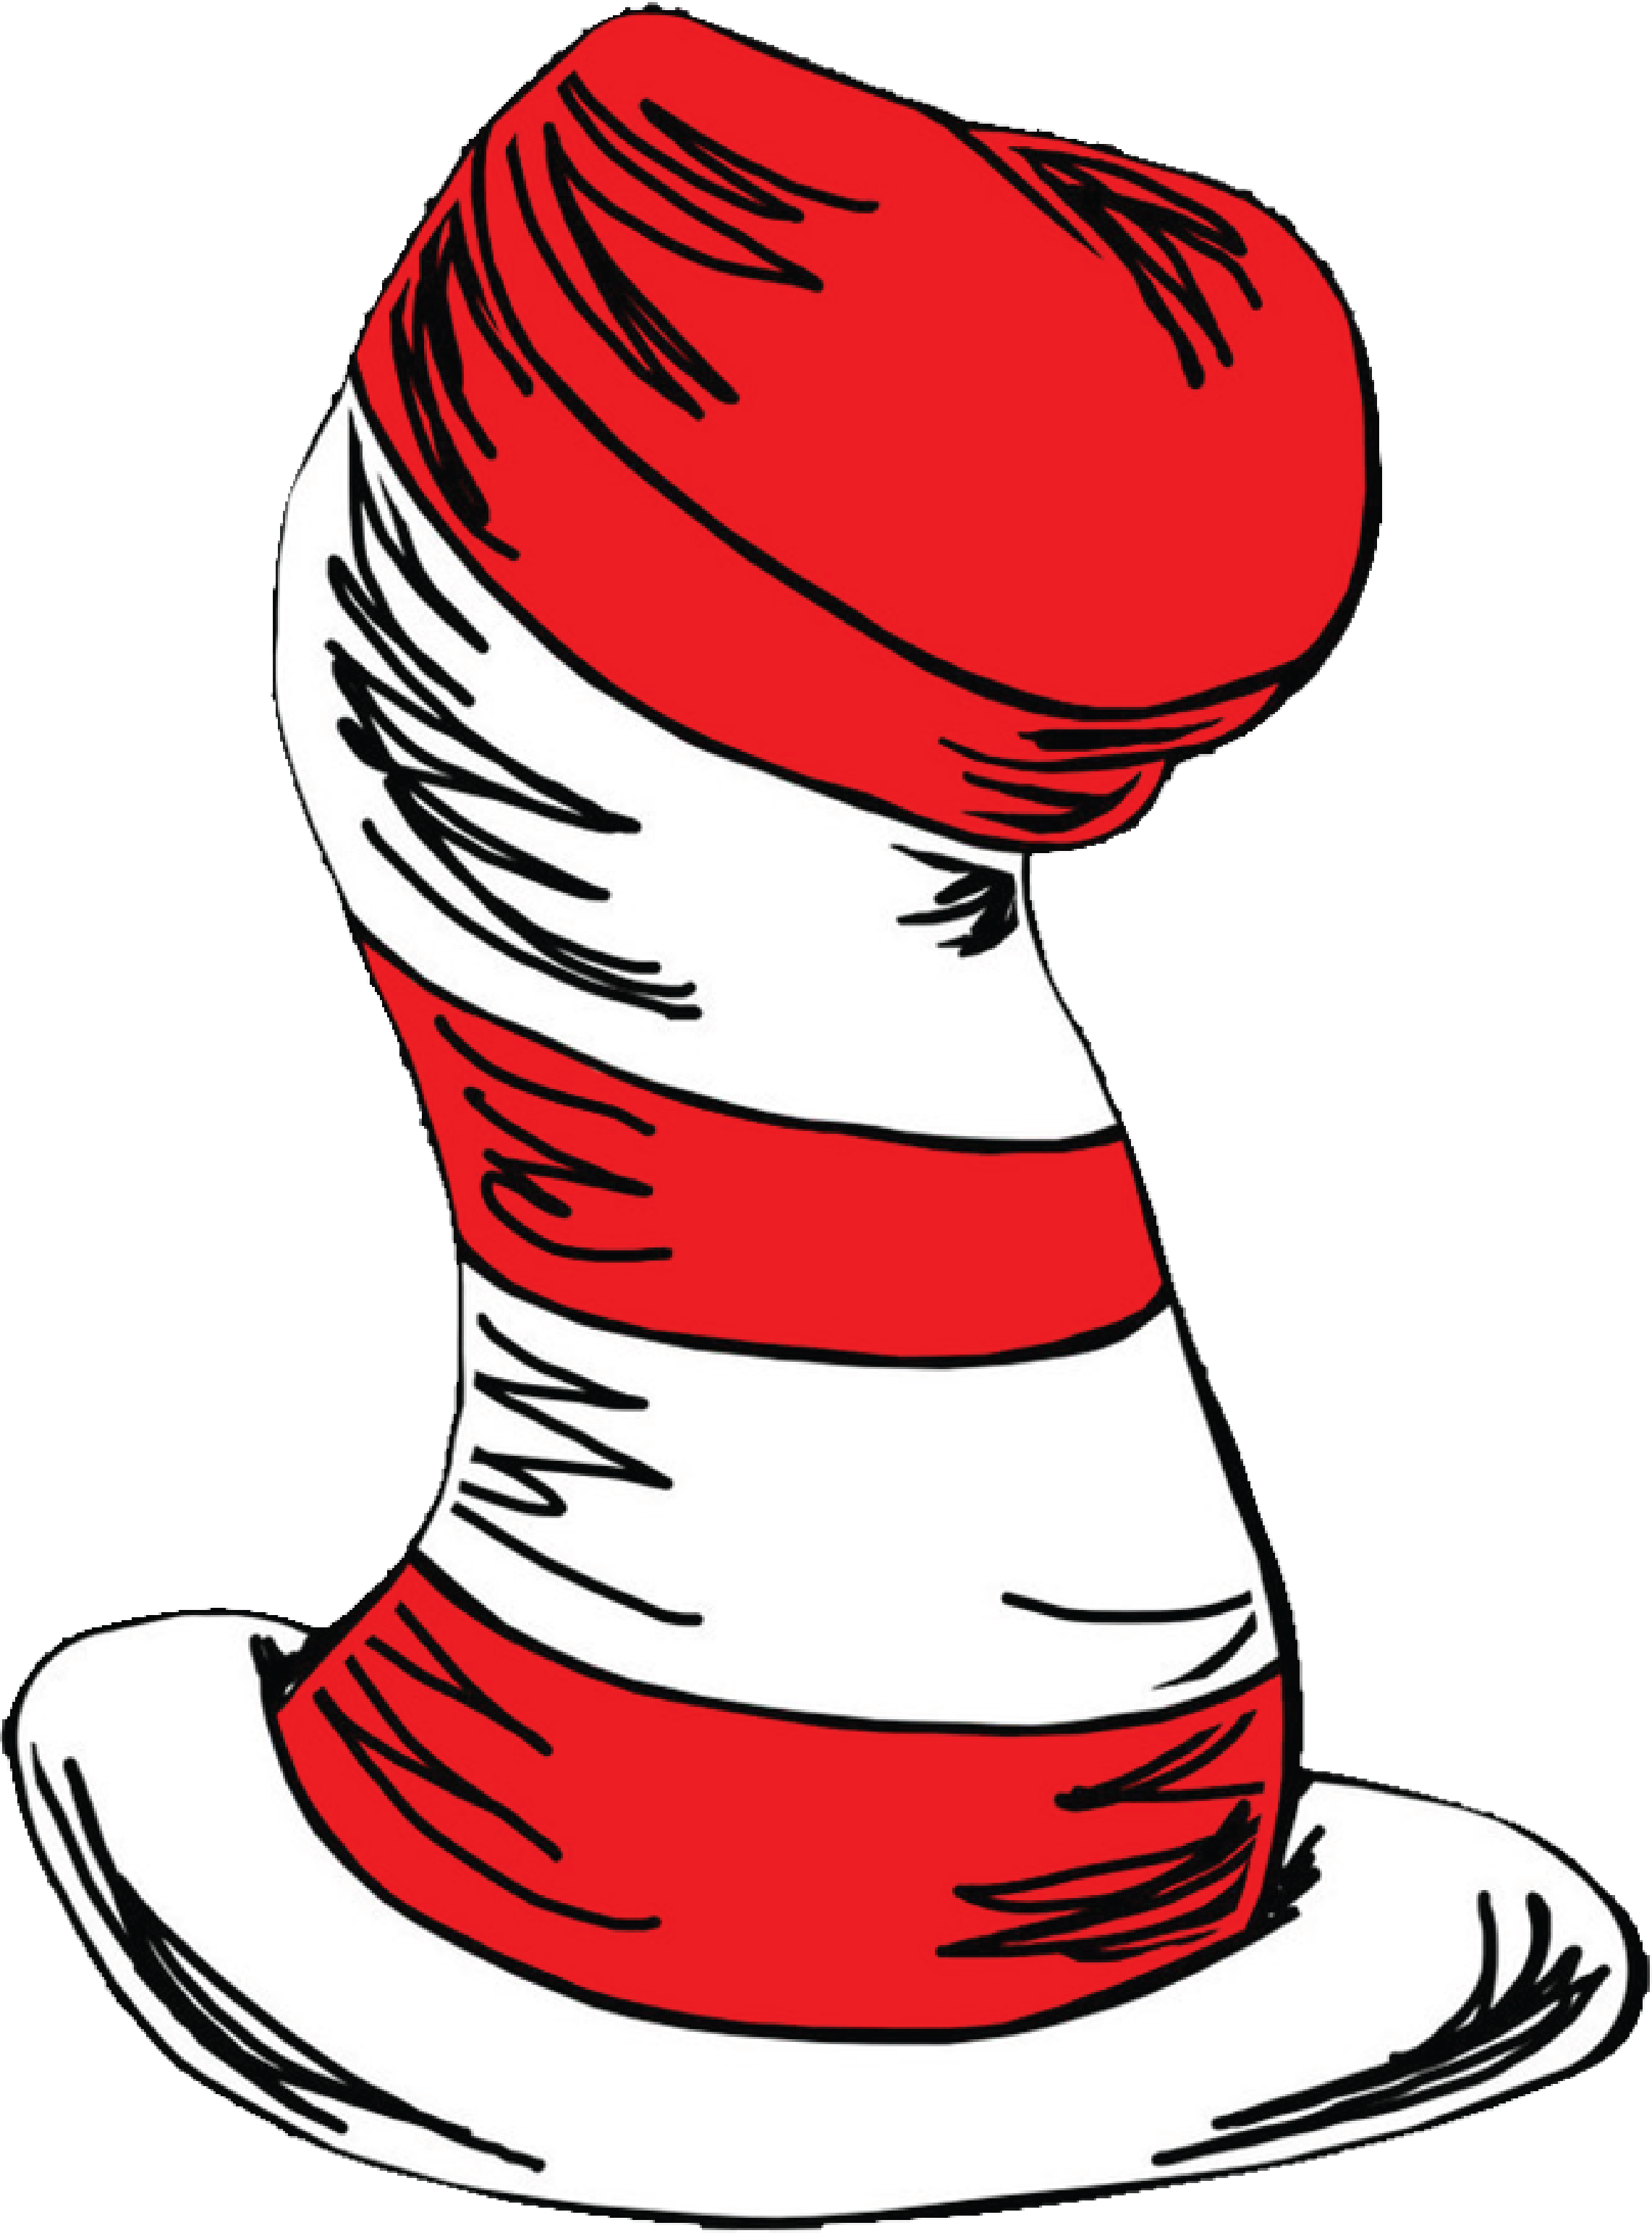 The Cat in the Hat Green Eggs and Ham Clip art - dr seuss png download ...